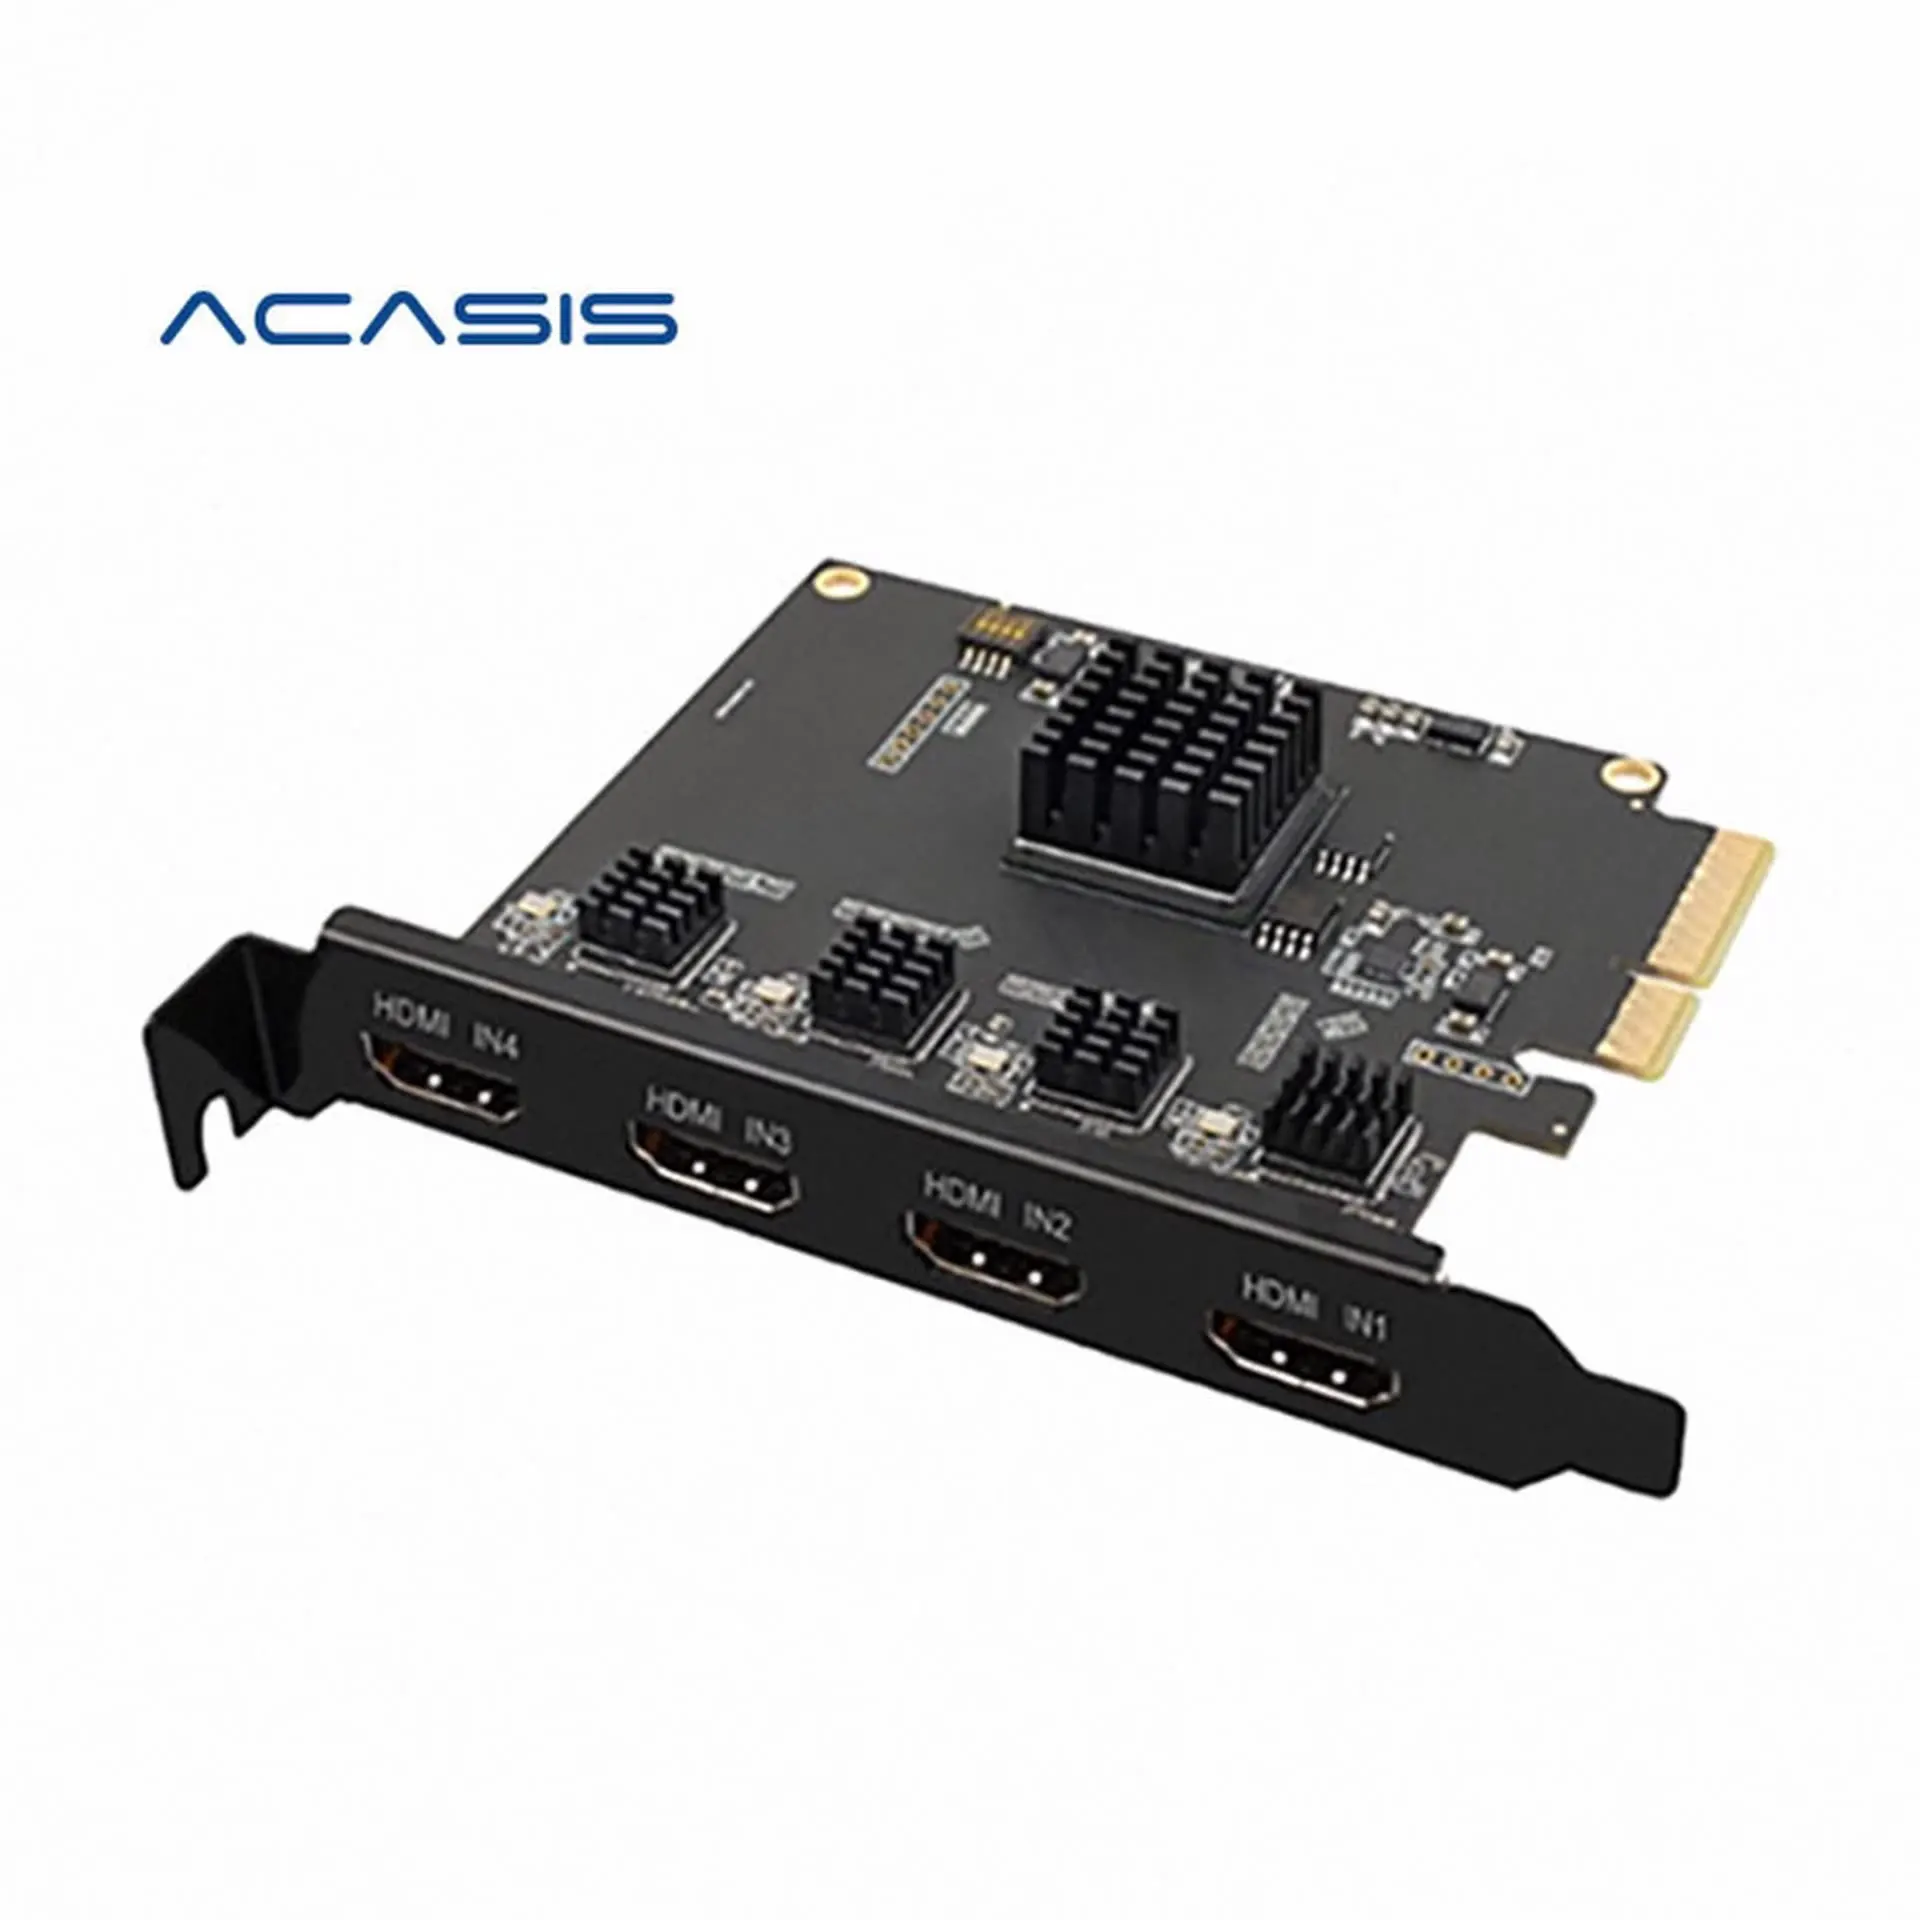 

Acasis Hot Selling 4 Channel HD-compatible PCIE Video Capture Card 1080p 60fps OBS Wirecast Live Broadcast Streaming Adapter, Black